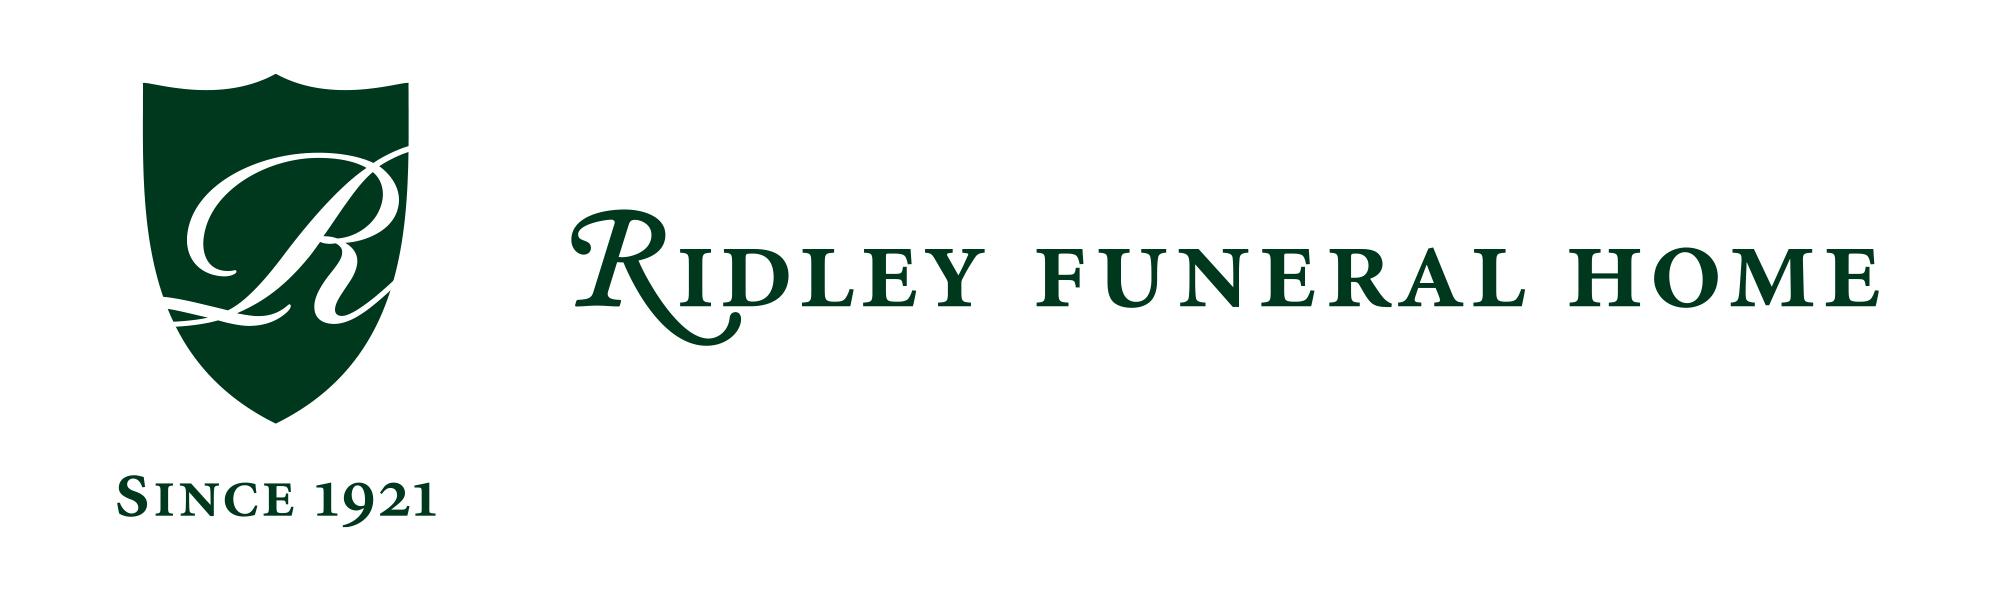 Ridley Funeral Home | Prearrange Your Funeral